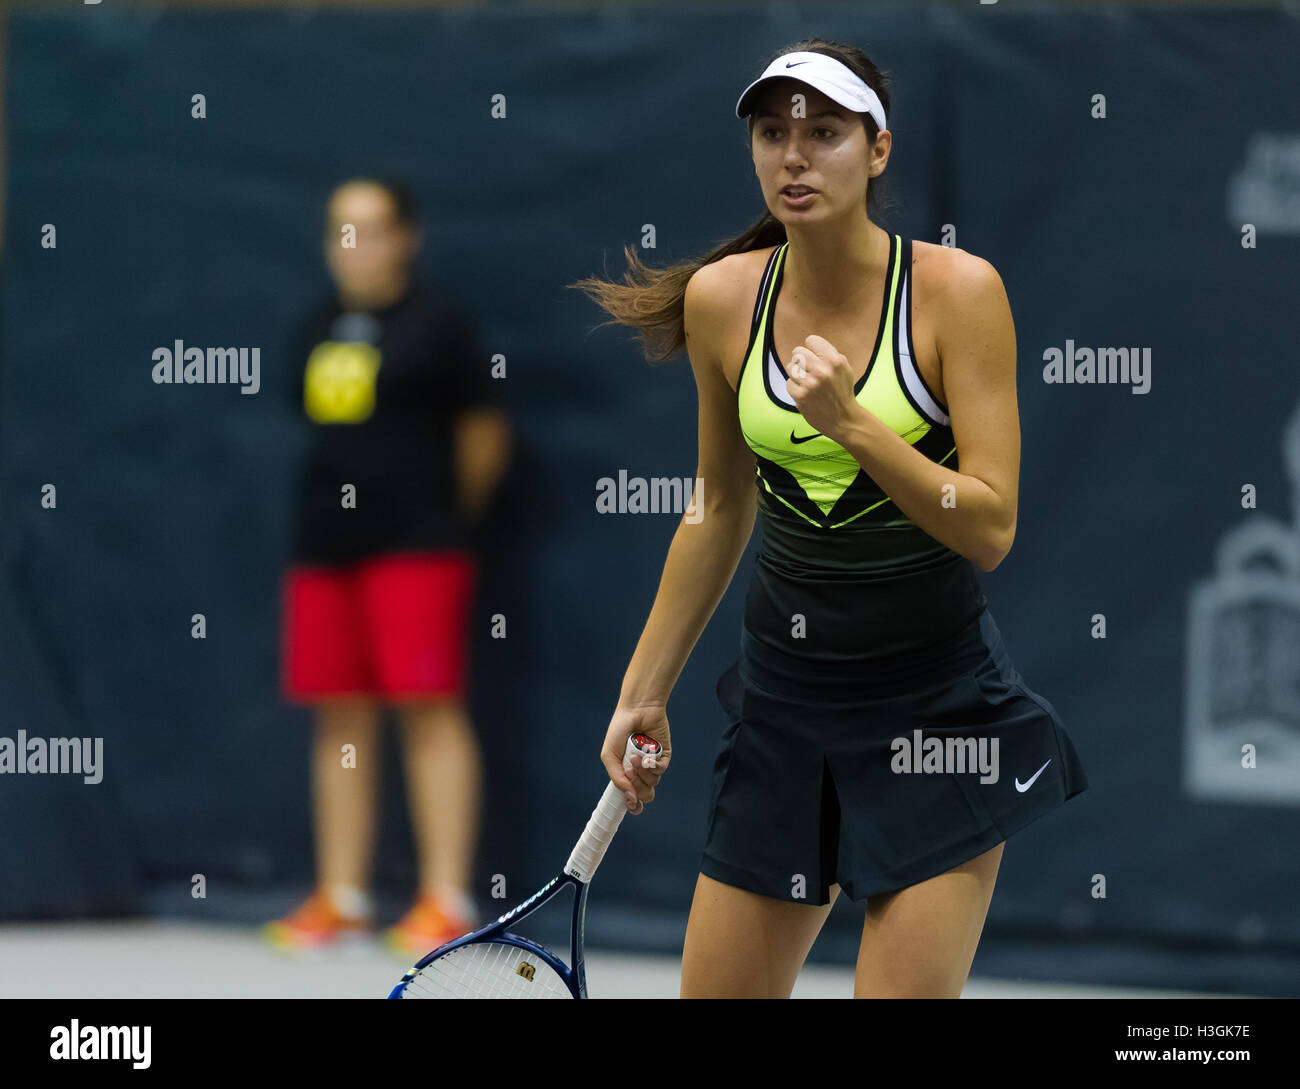 Linz, Austria. 8 October, 2016. Oceane Dodin in action at the 2016 Generali Ladies Linz WTA International tennis tournament Credit:  Jimmie48 Photography/Alamy Live News Stock Photo